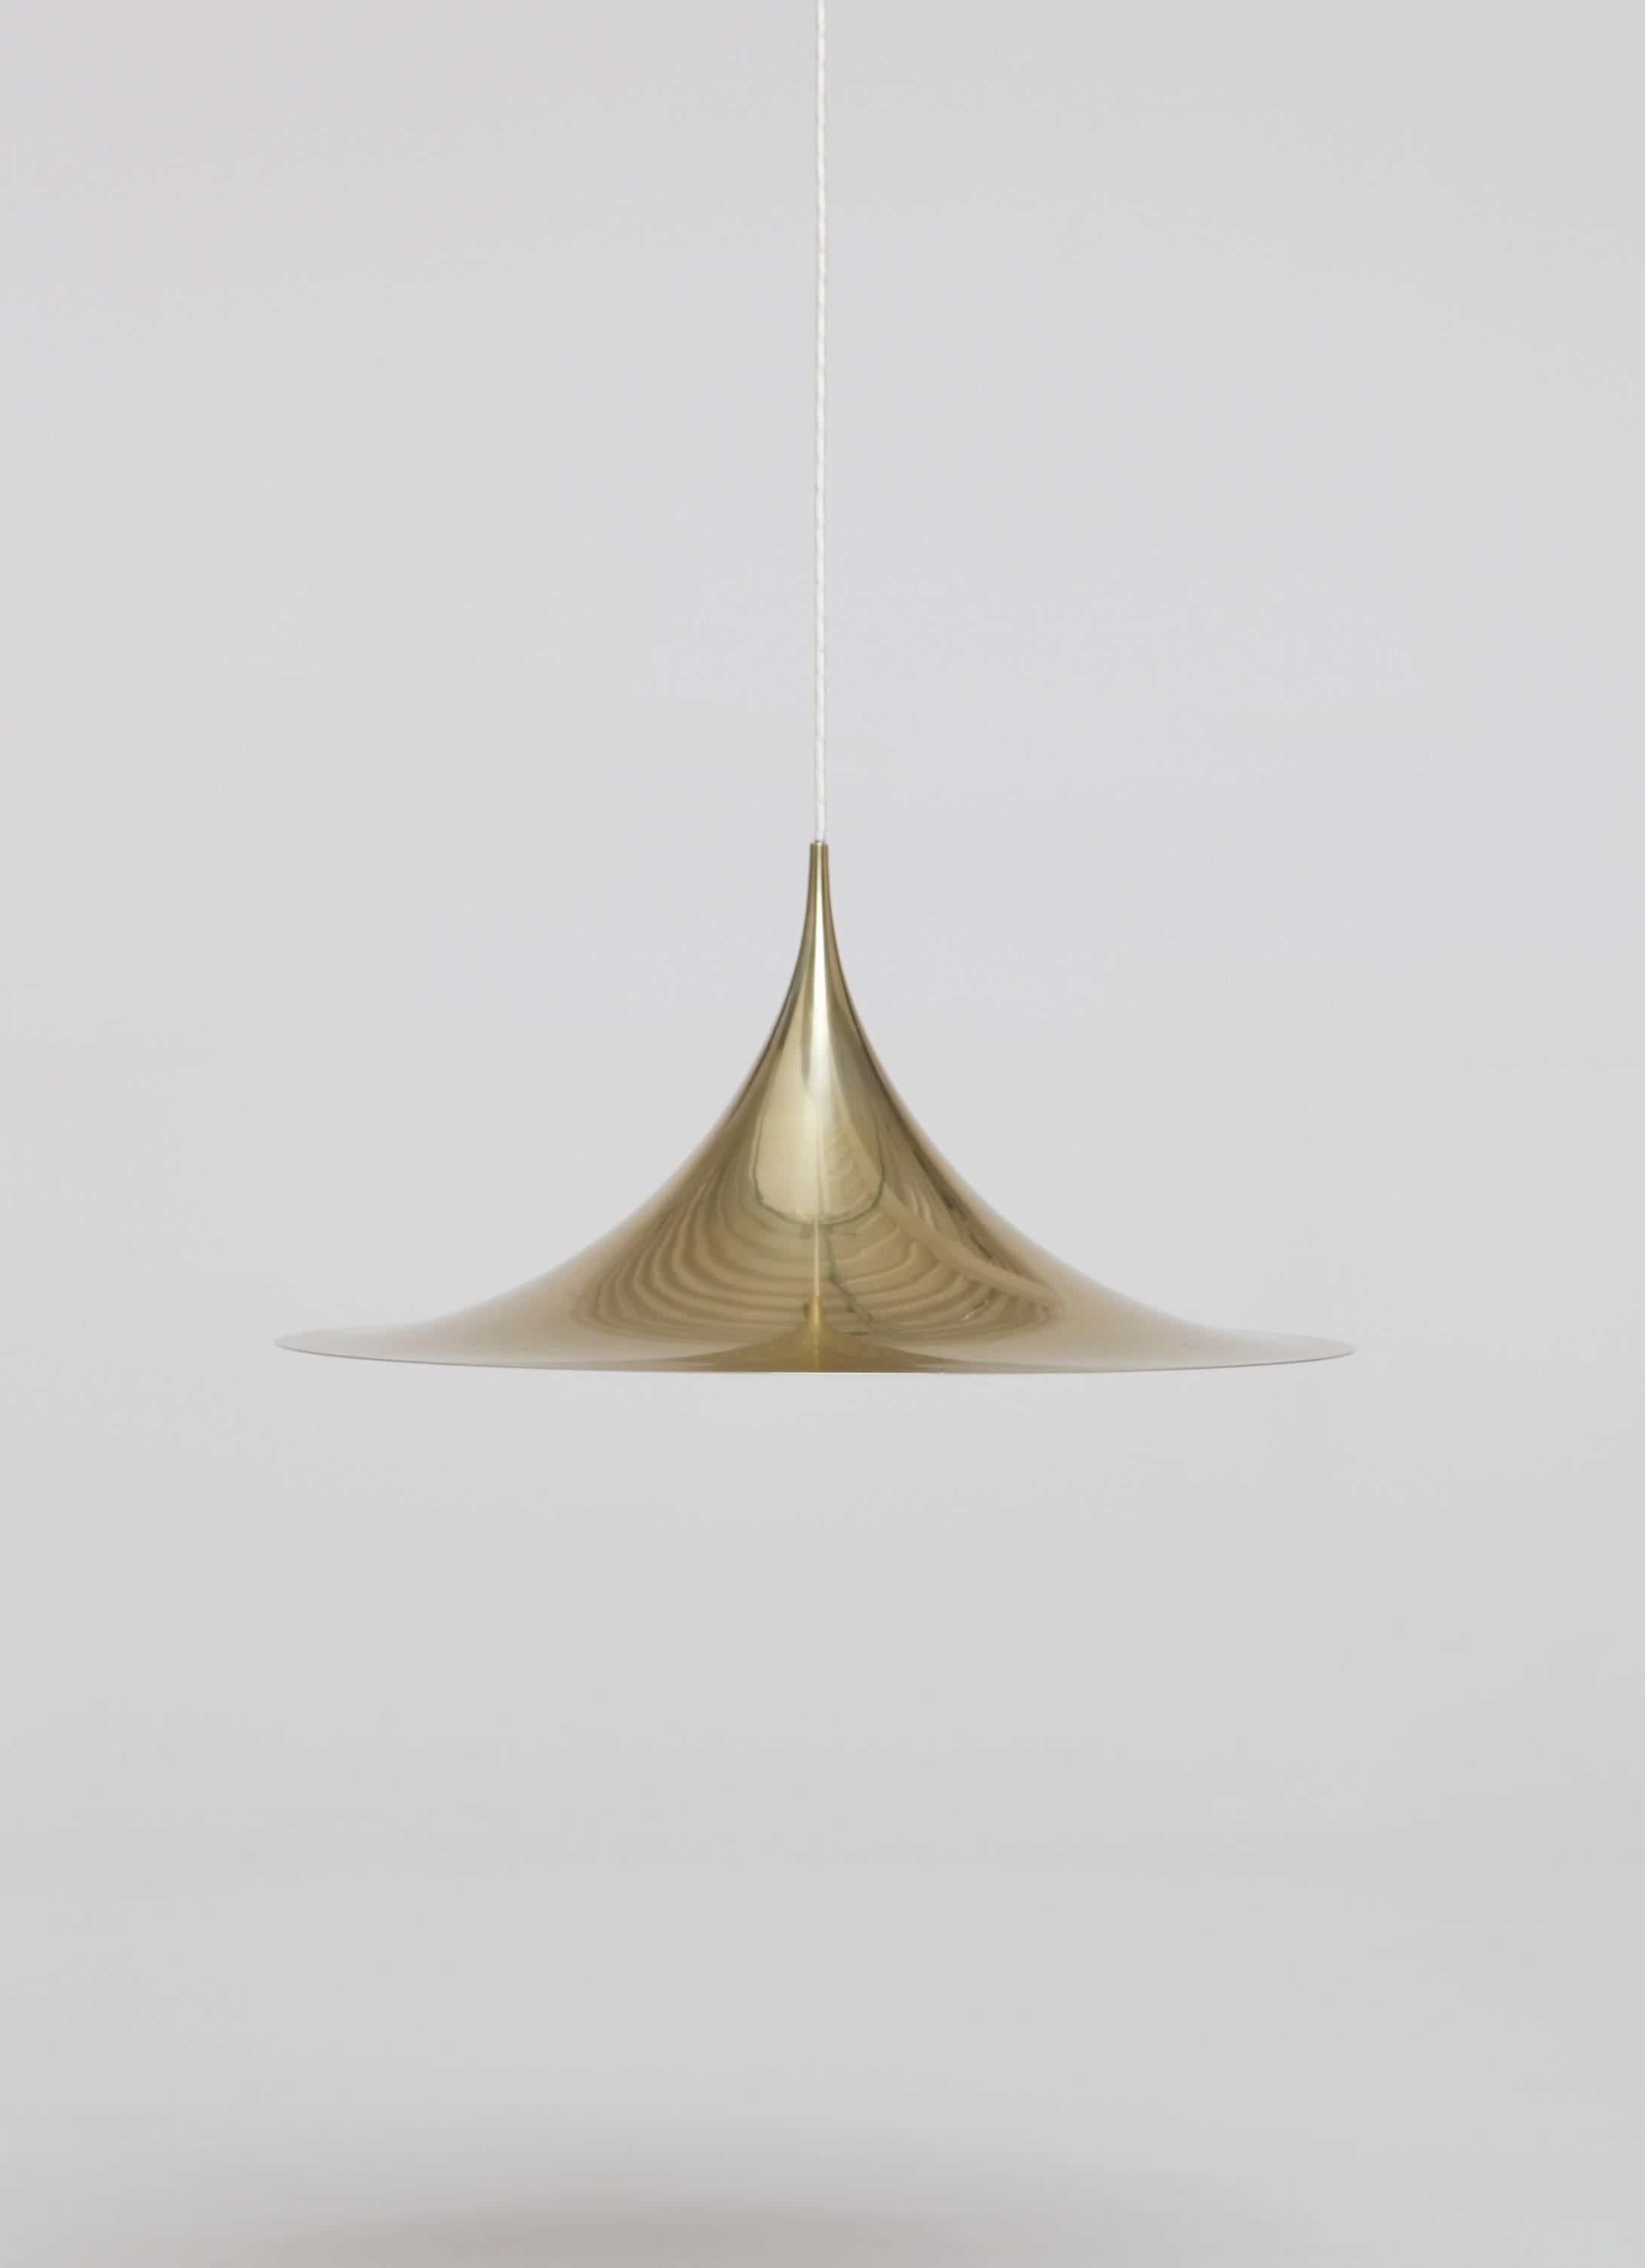 Claus Bonderup and Torsten Thorup designed brass semi Pendant. Manufactured by Fog and Mørup, Denmark, 1960s.

In good vintage condition only very minor marks / wear relative to age

Measure: Diameter 59cm.

Ships worldwide.